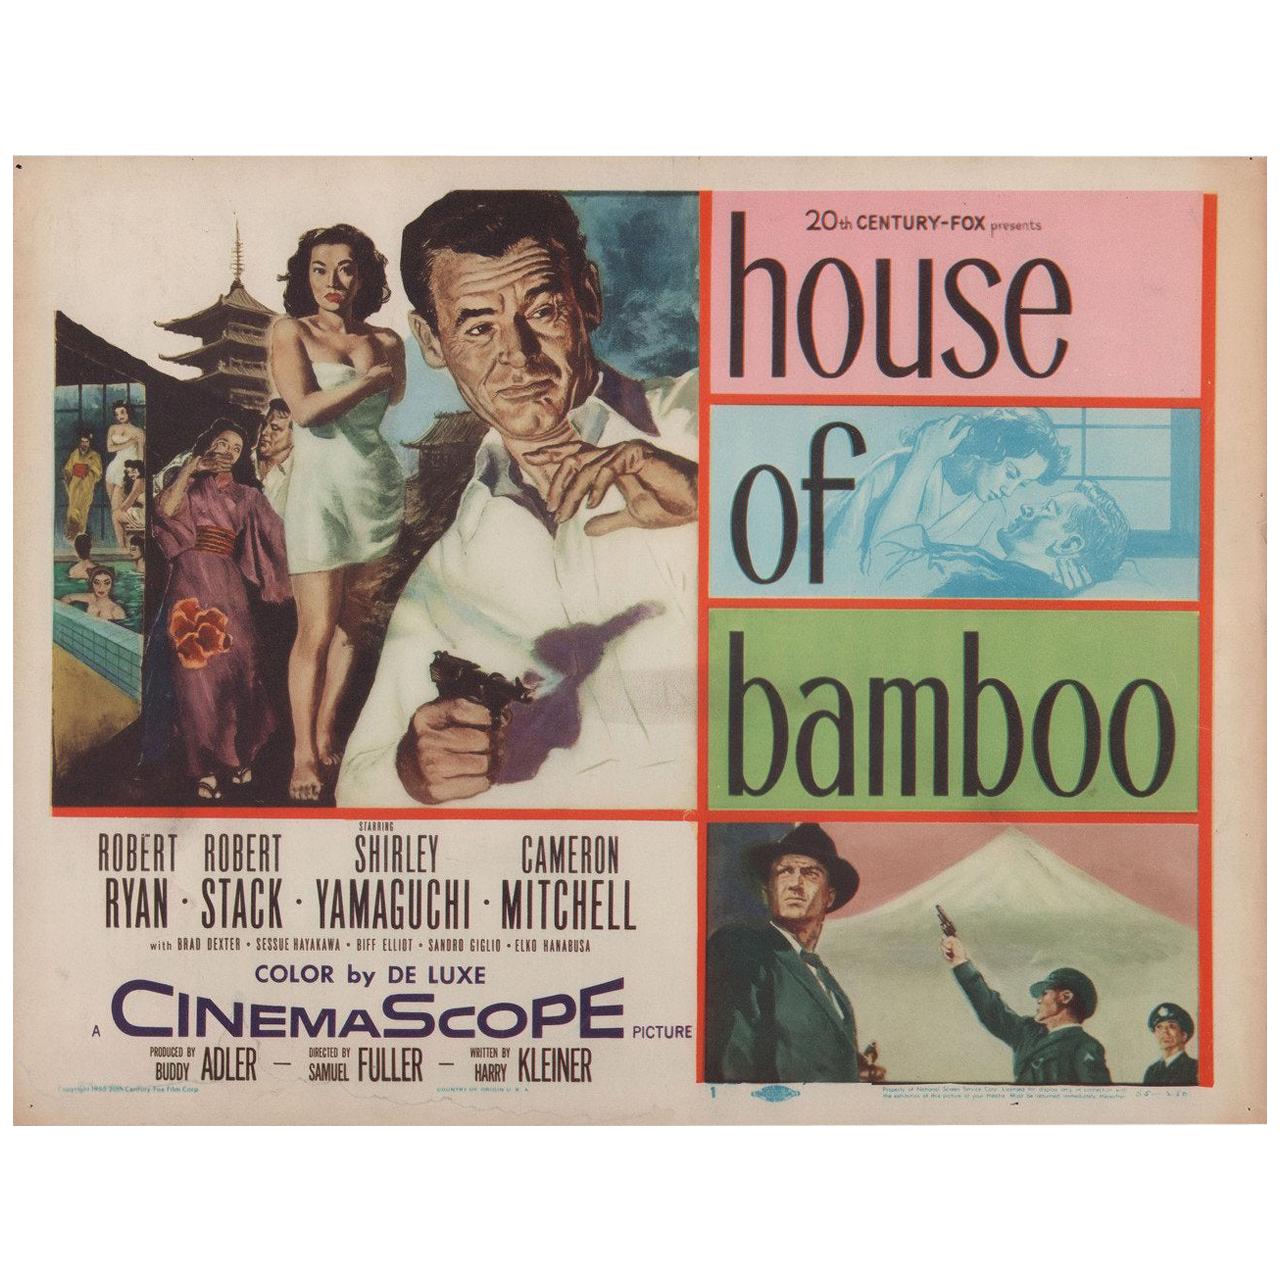 "House of Bamboo" 1955 U.S. Title Card